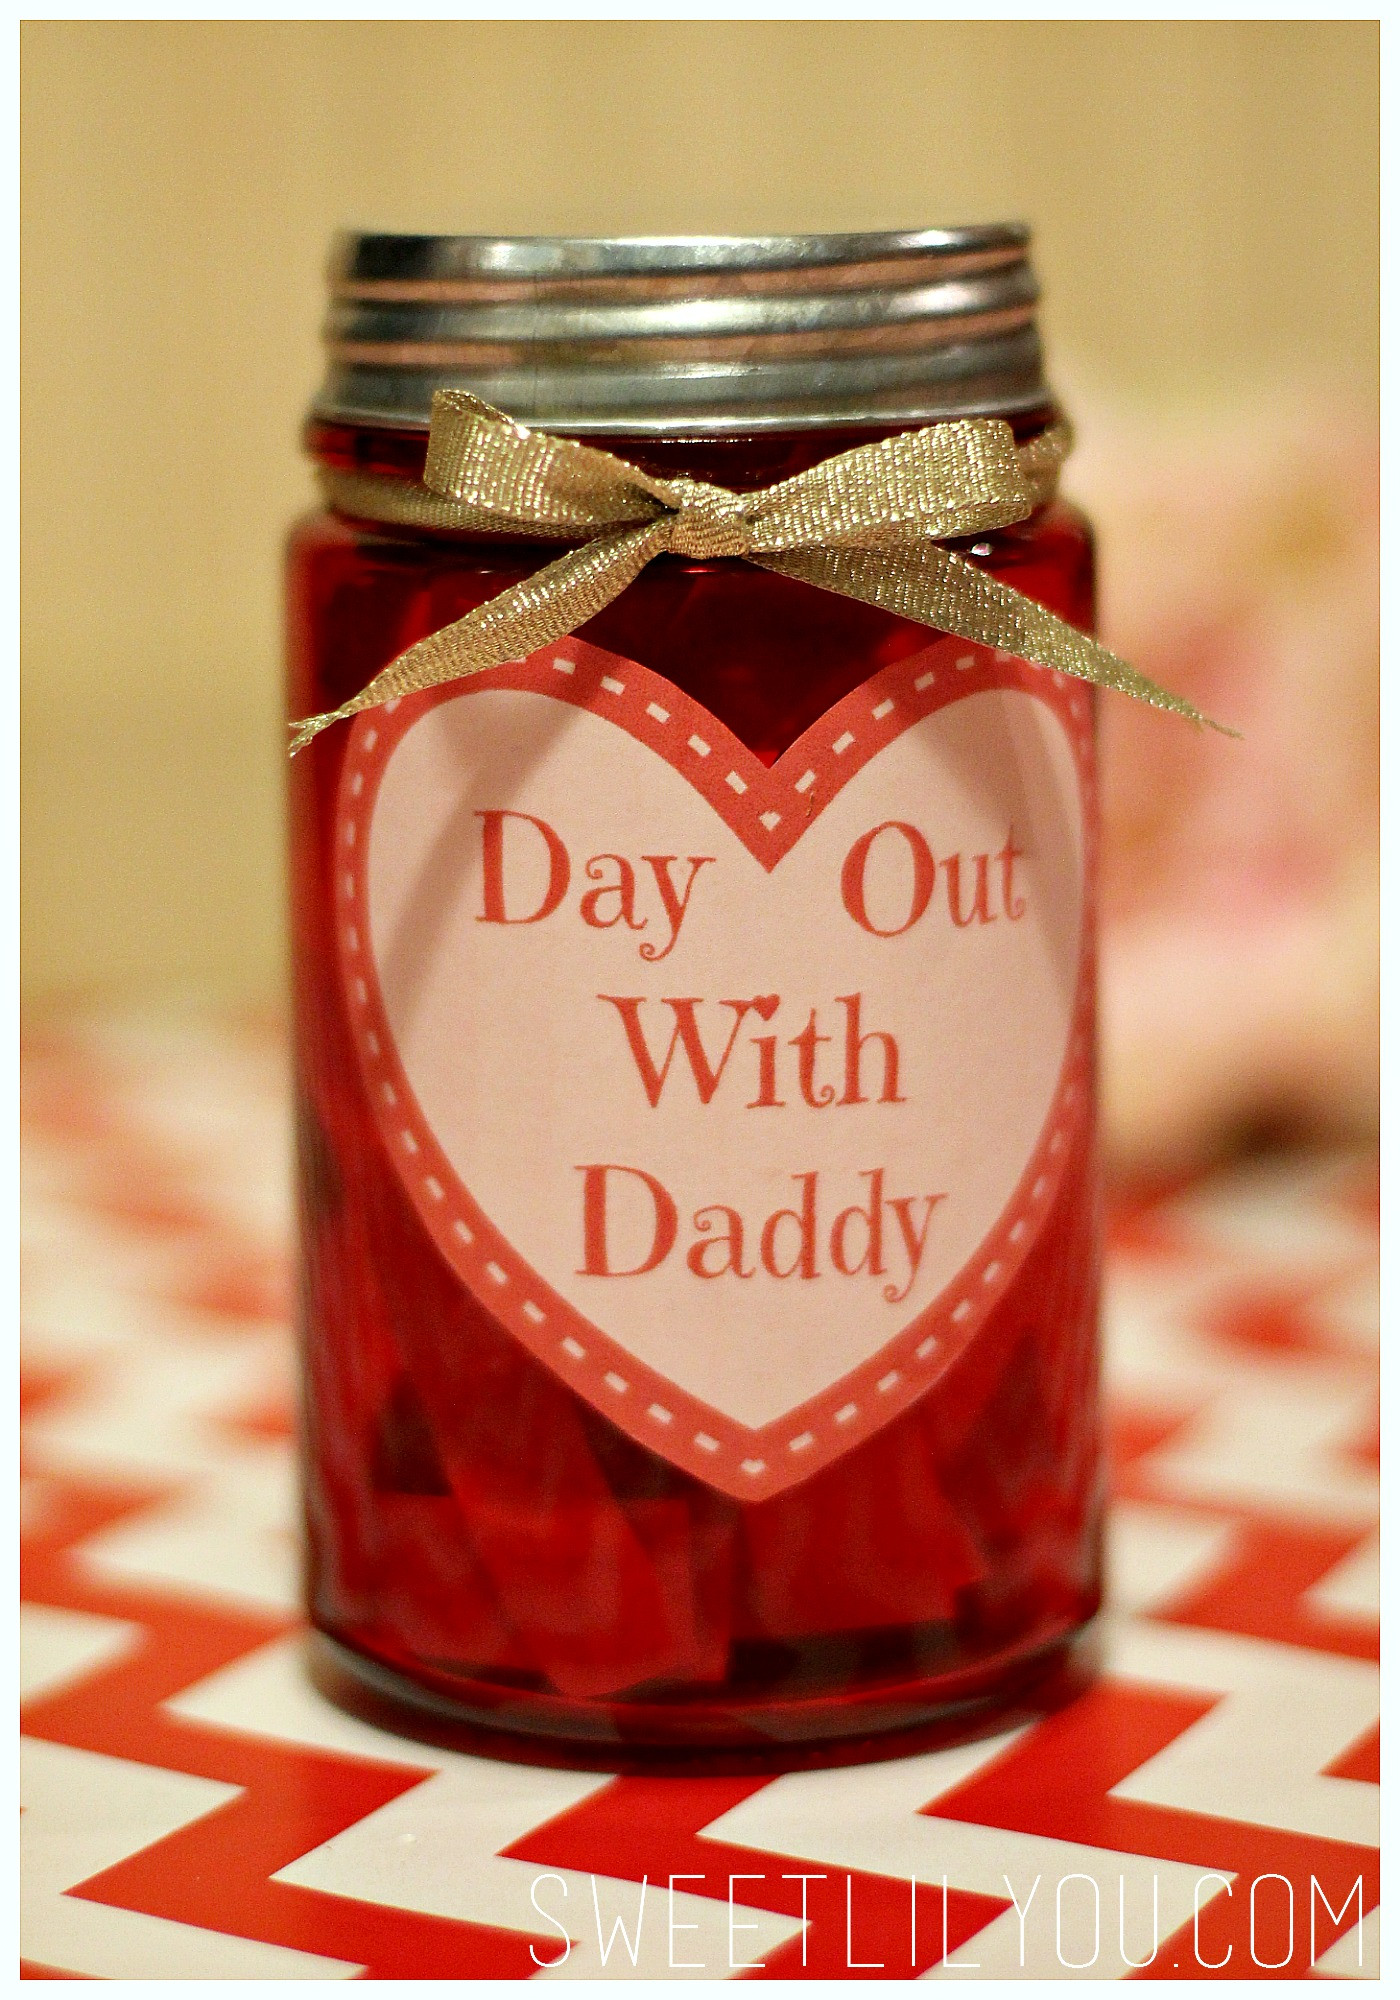 New Dad Valentines Day Gifts Fresh Day Out with Daddy Jar Valentine S Day Gift for Dad